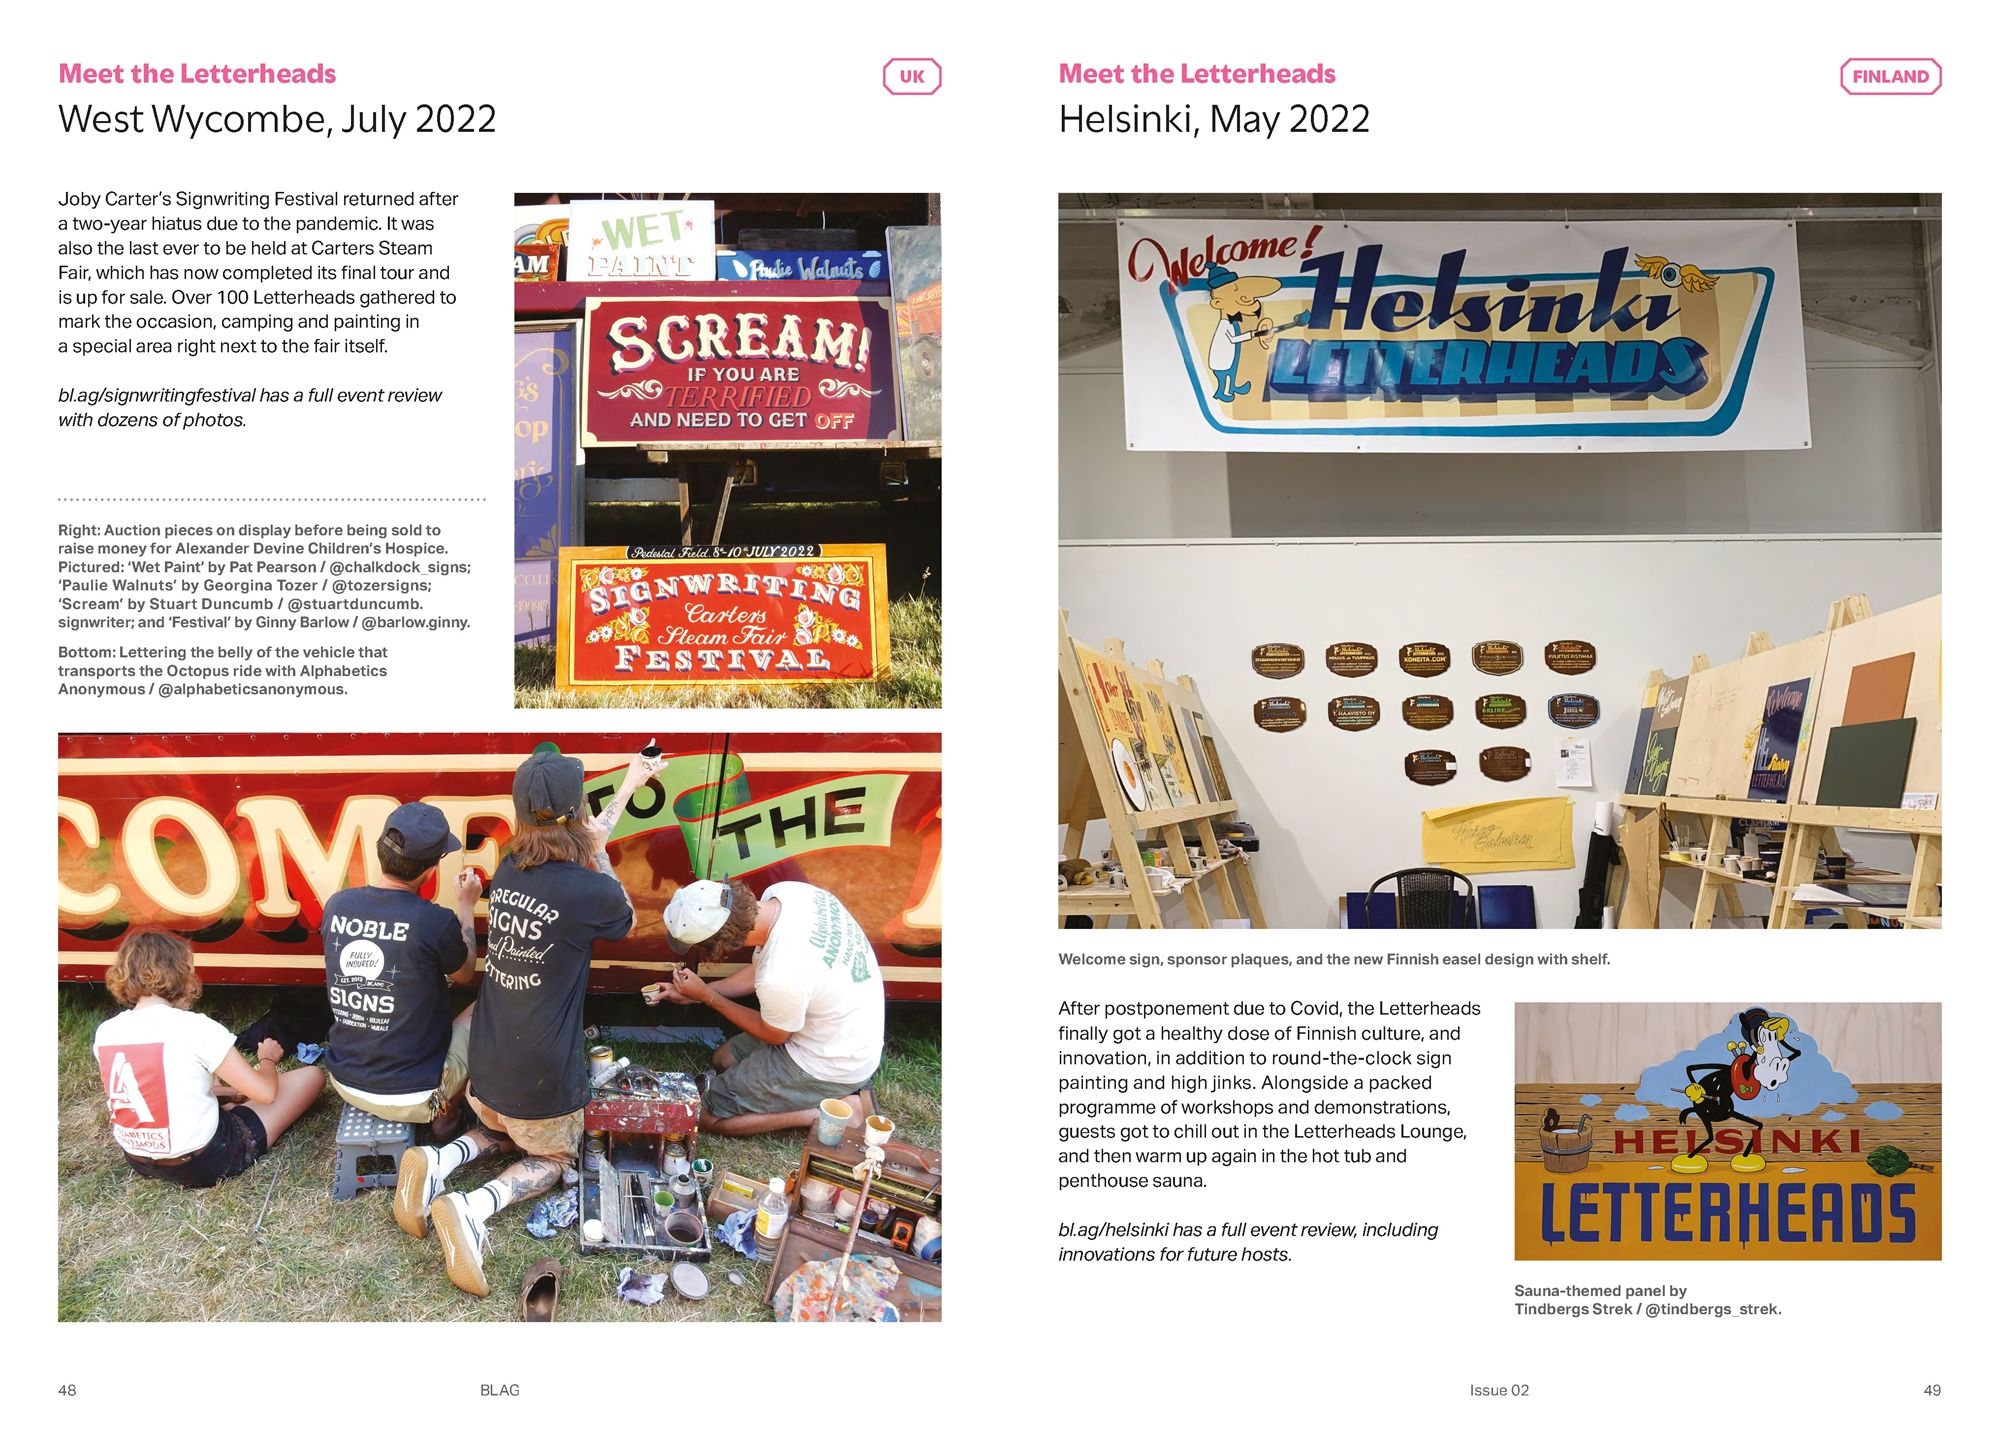 Magazine spread showing photos and text from sign painting events.